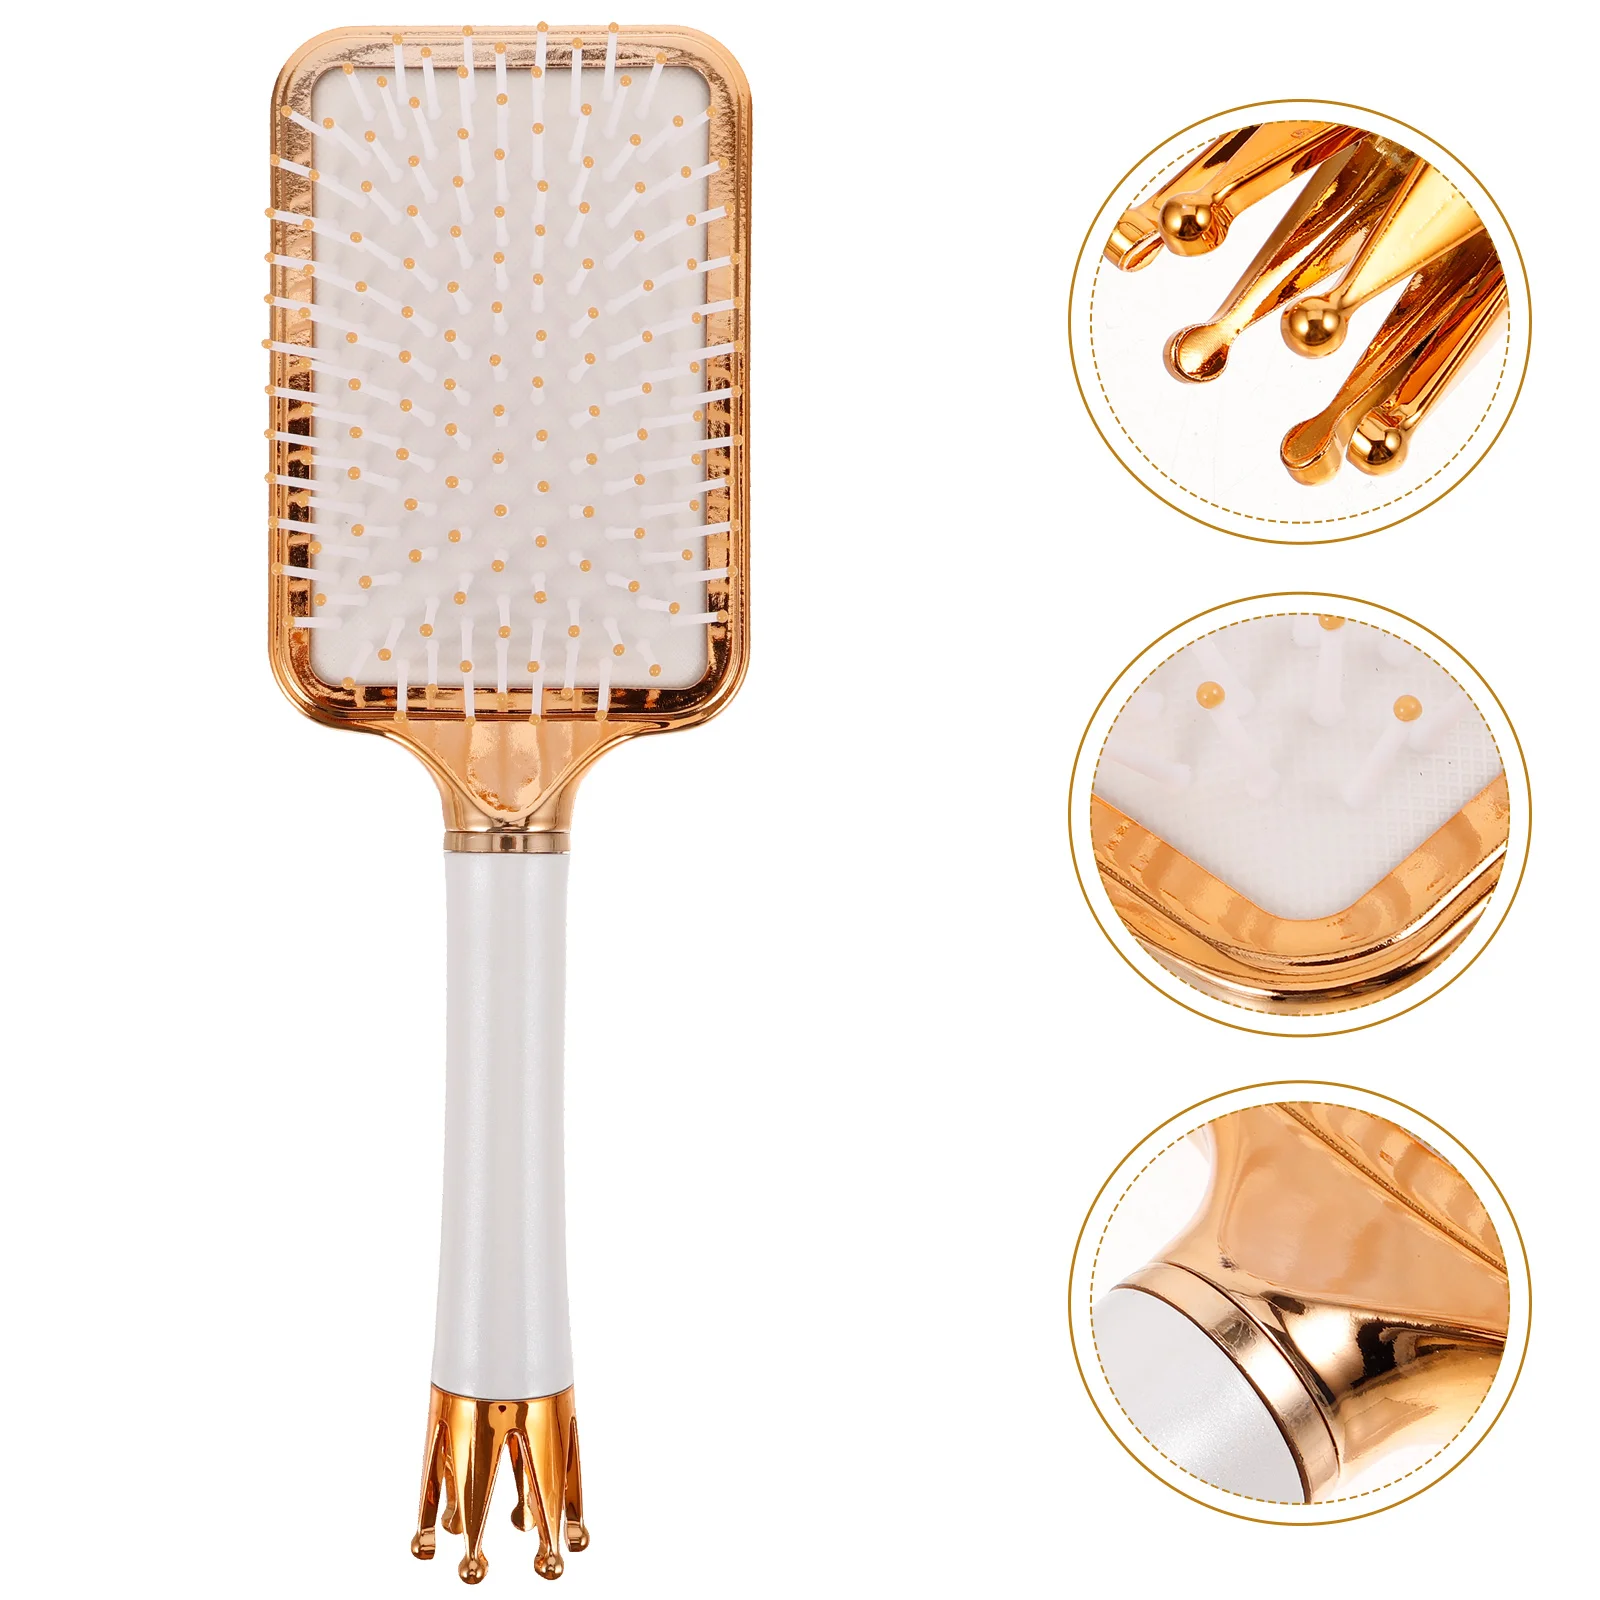 

Money Comb Hair Brush Hider Safe Container Hiding Places for Valuables Hidden Holder Travel Hiders Cash